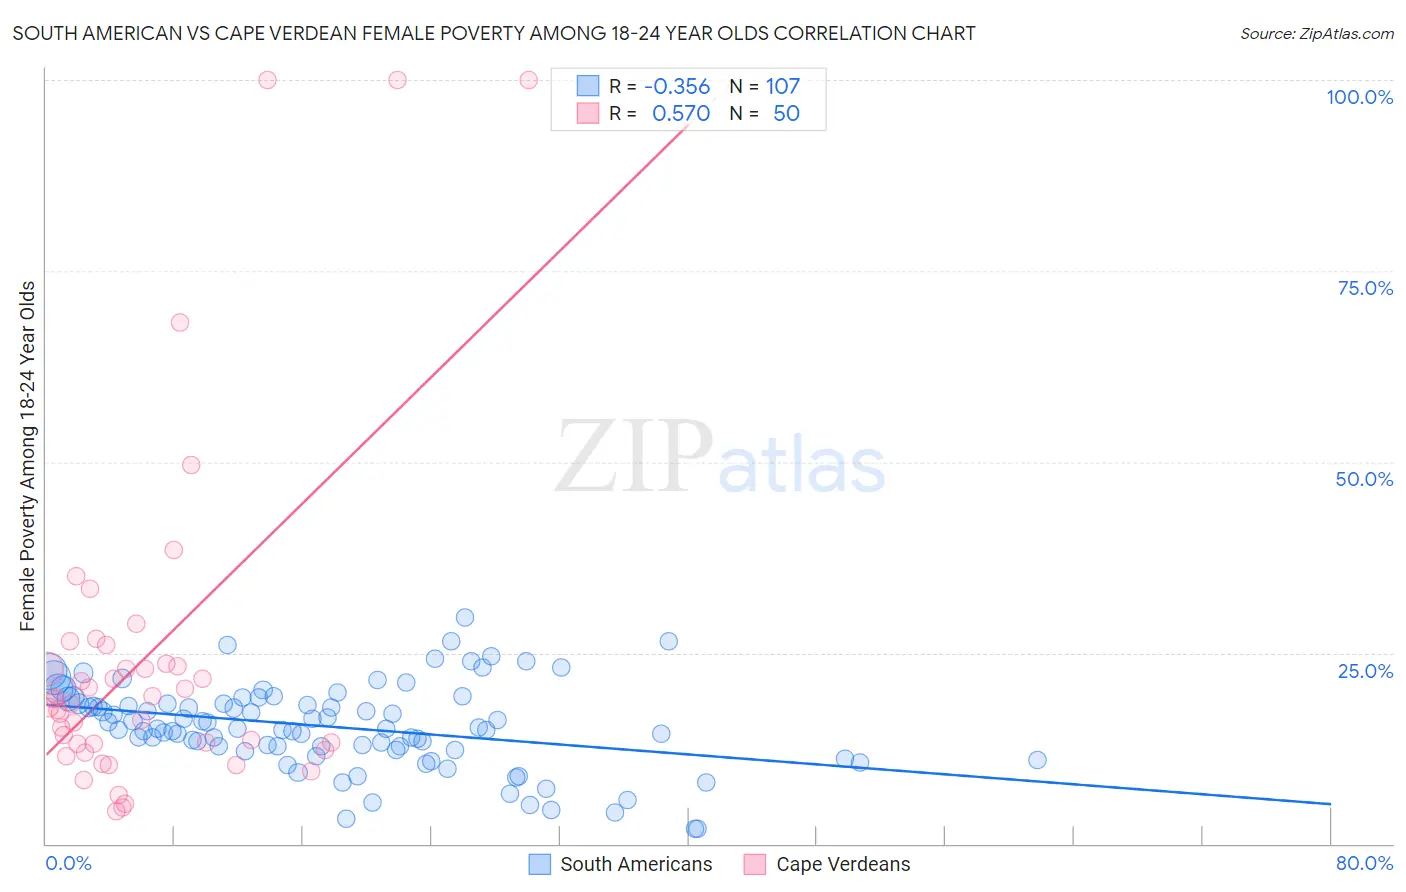 South American vs Cape Verdean Female Poverty Among 18-24 Year Olds